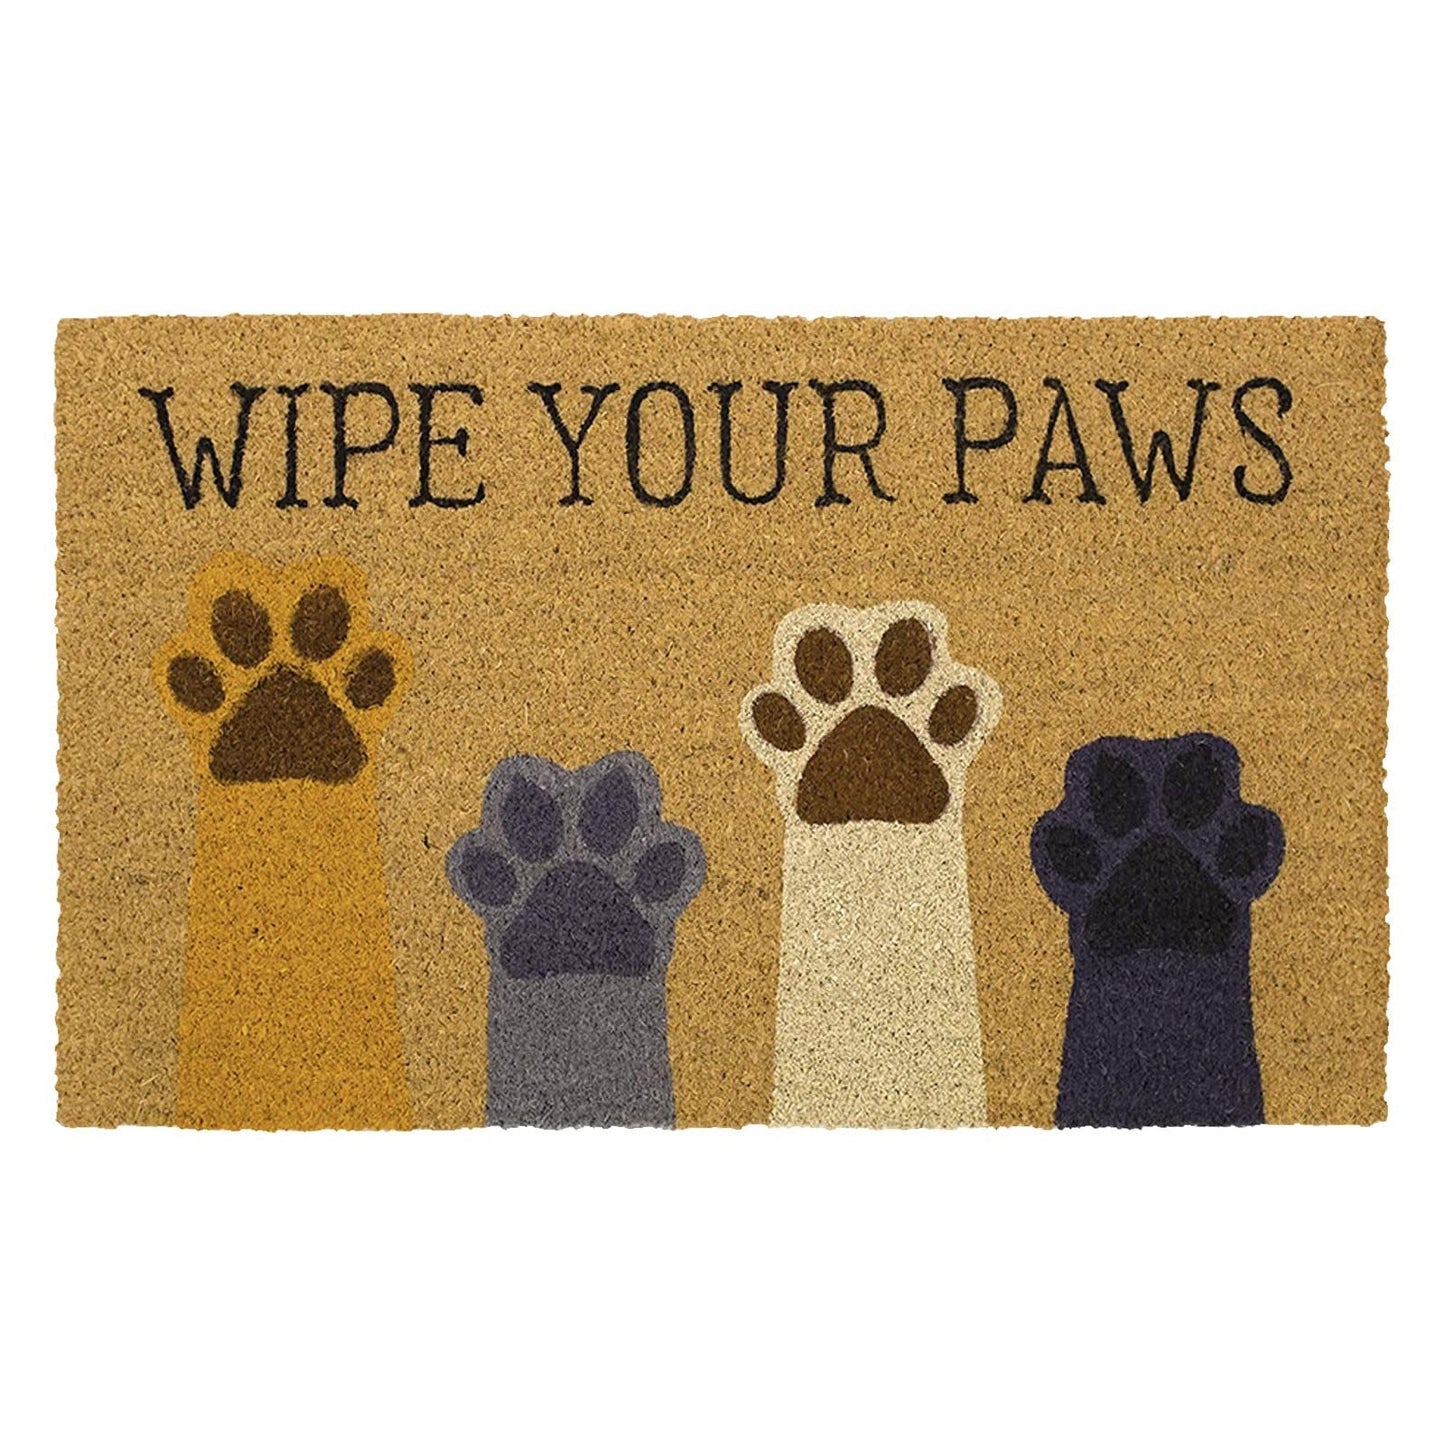 Wipe your paws' welcome cat carpet cat rug